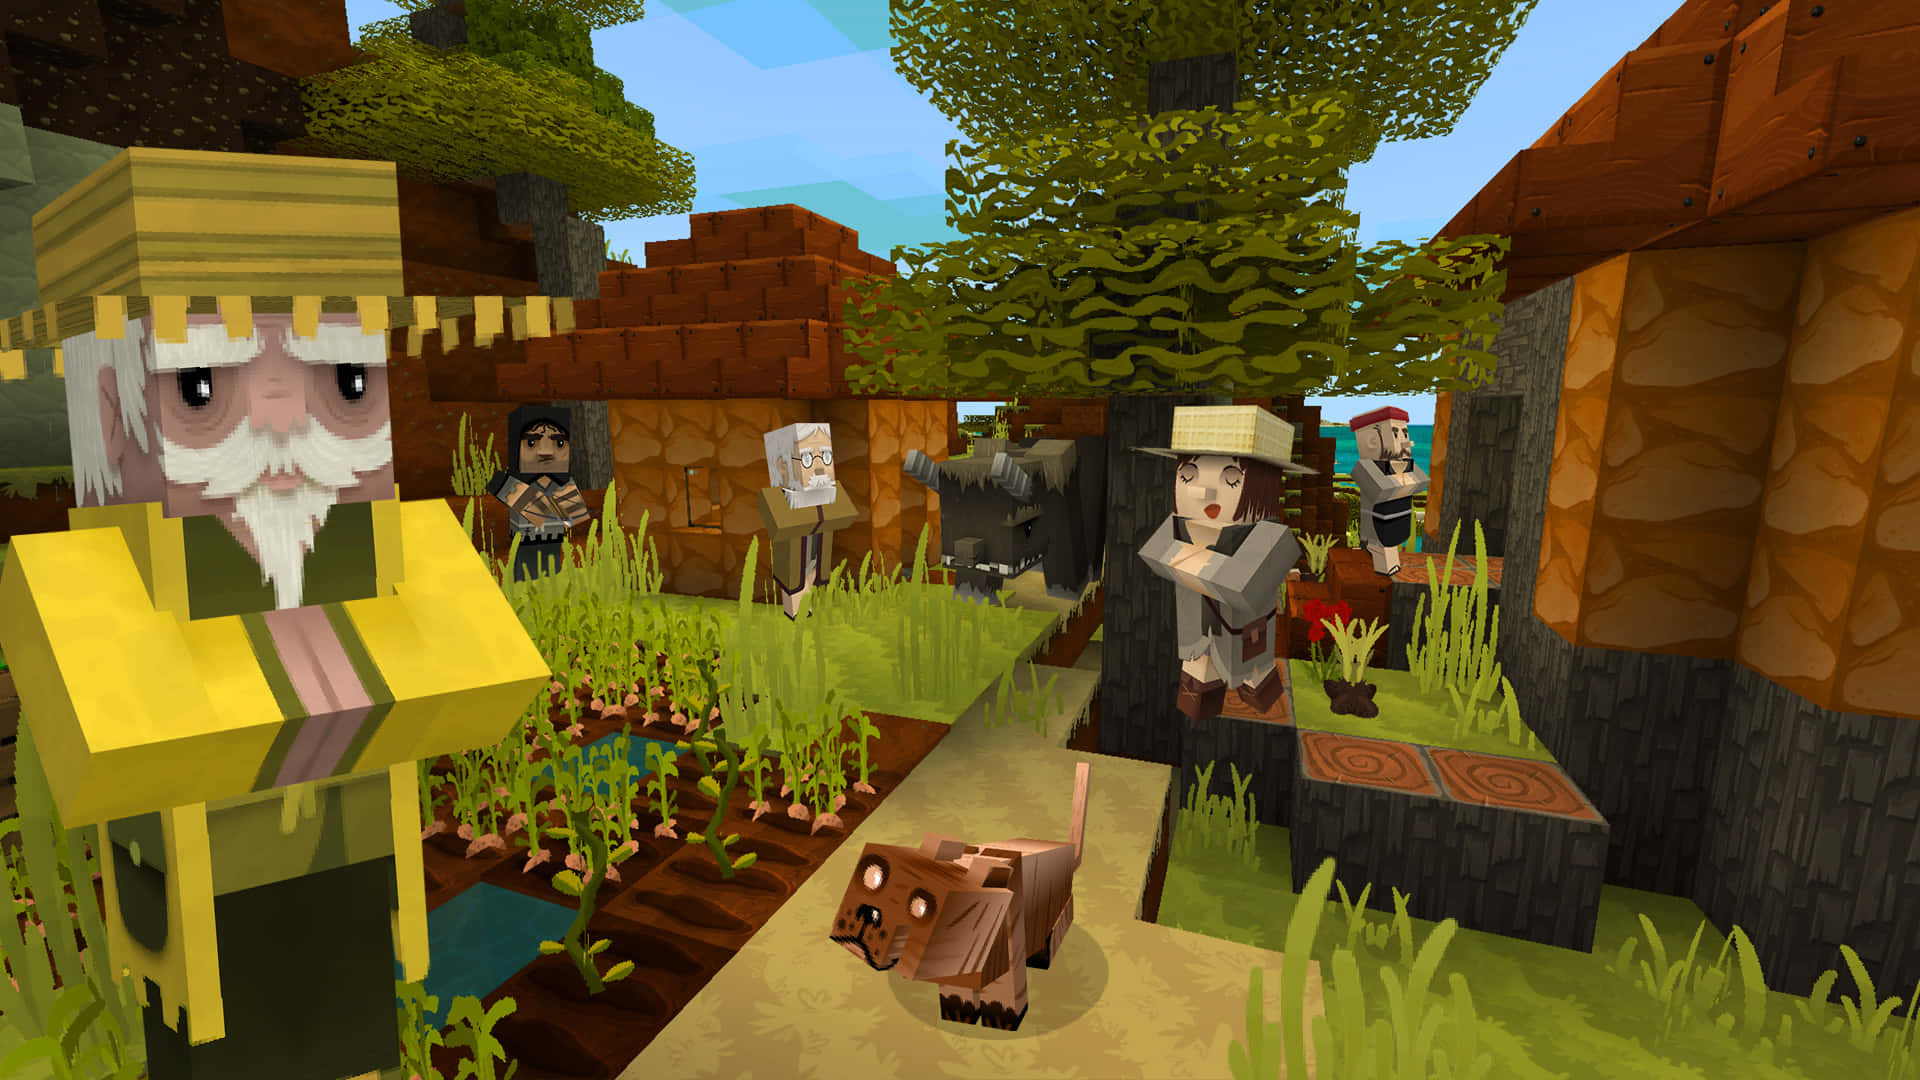 Friendly Minecraft Villagers Gathering in the Village Square Wallpaper